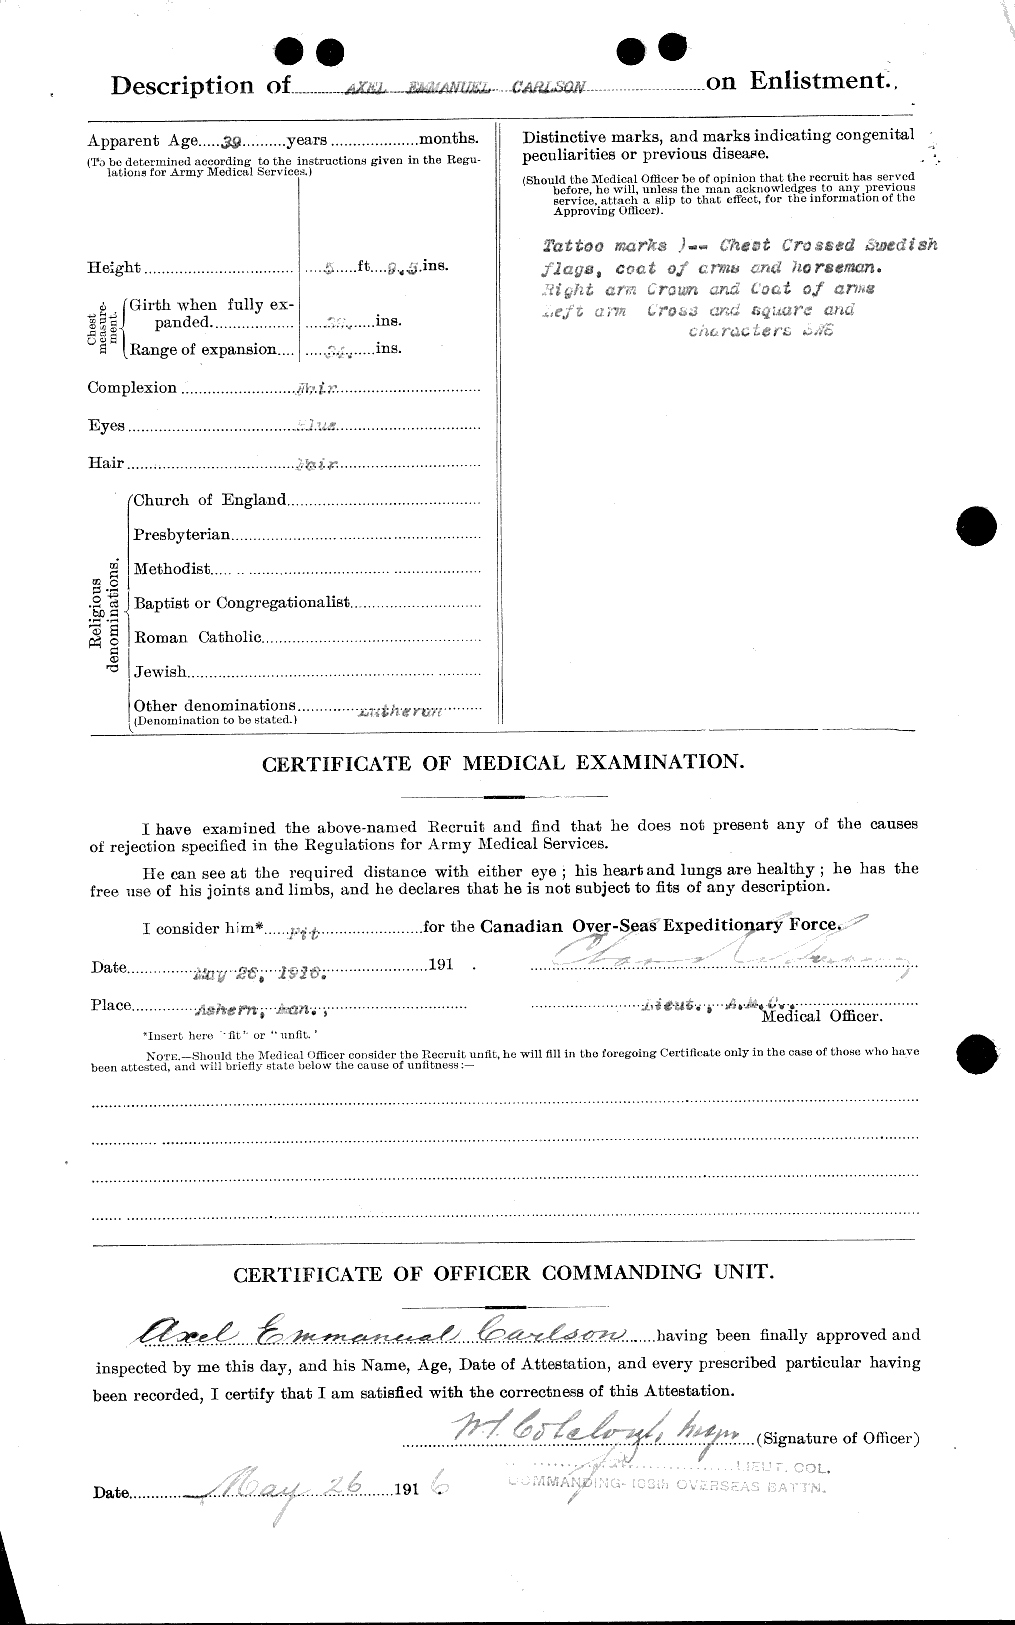 Personnel Records of the First World War - CEF 004489b